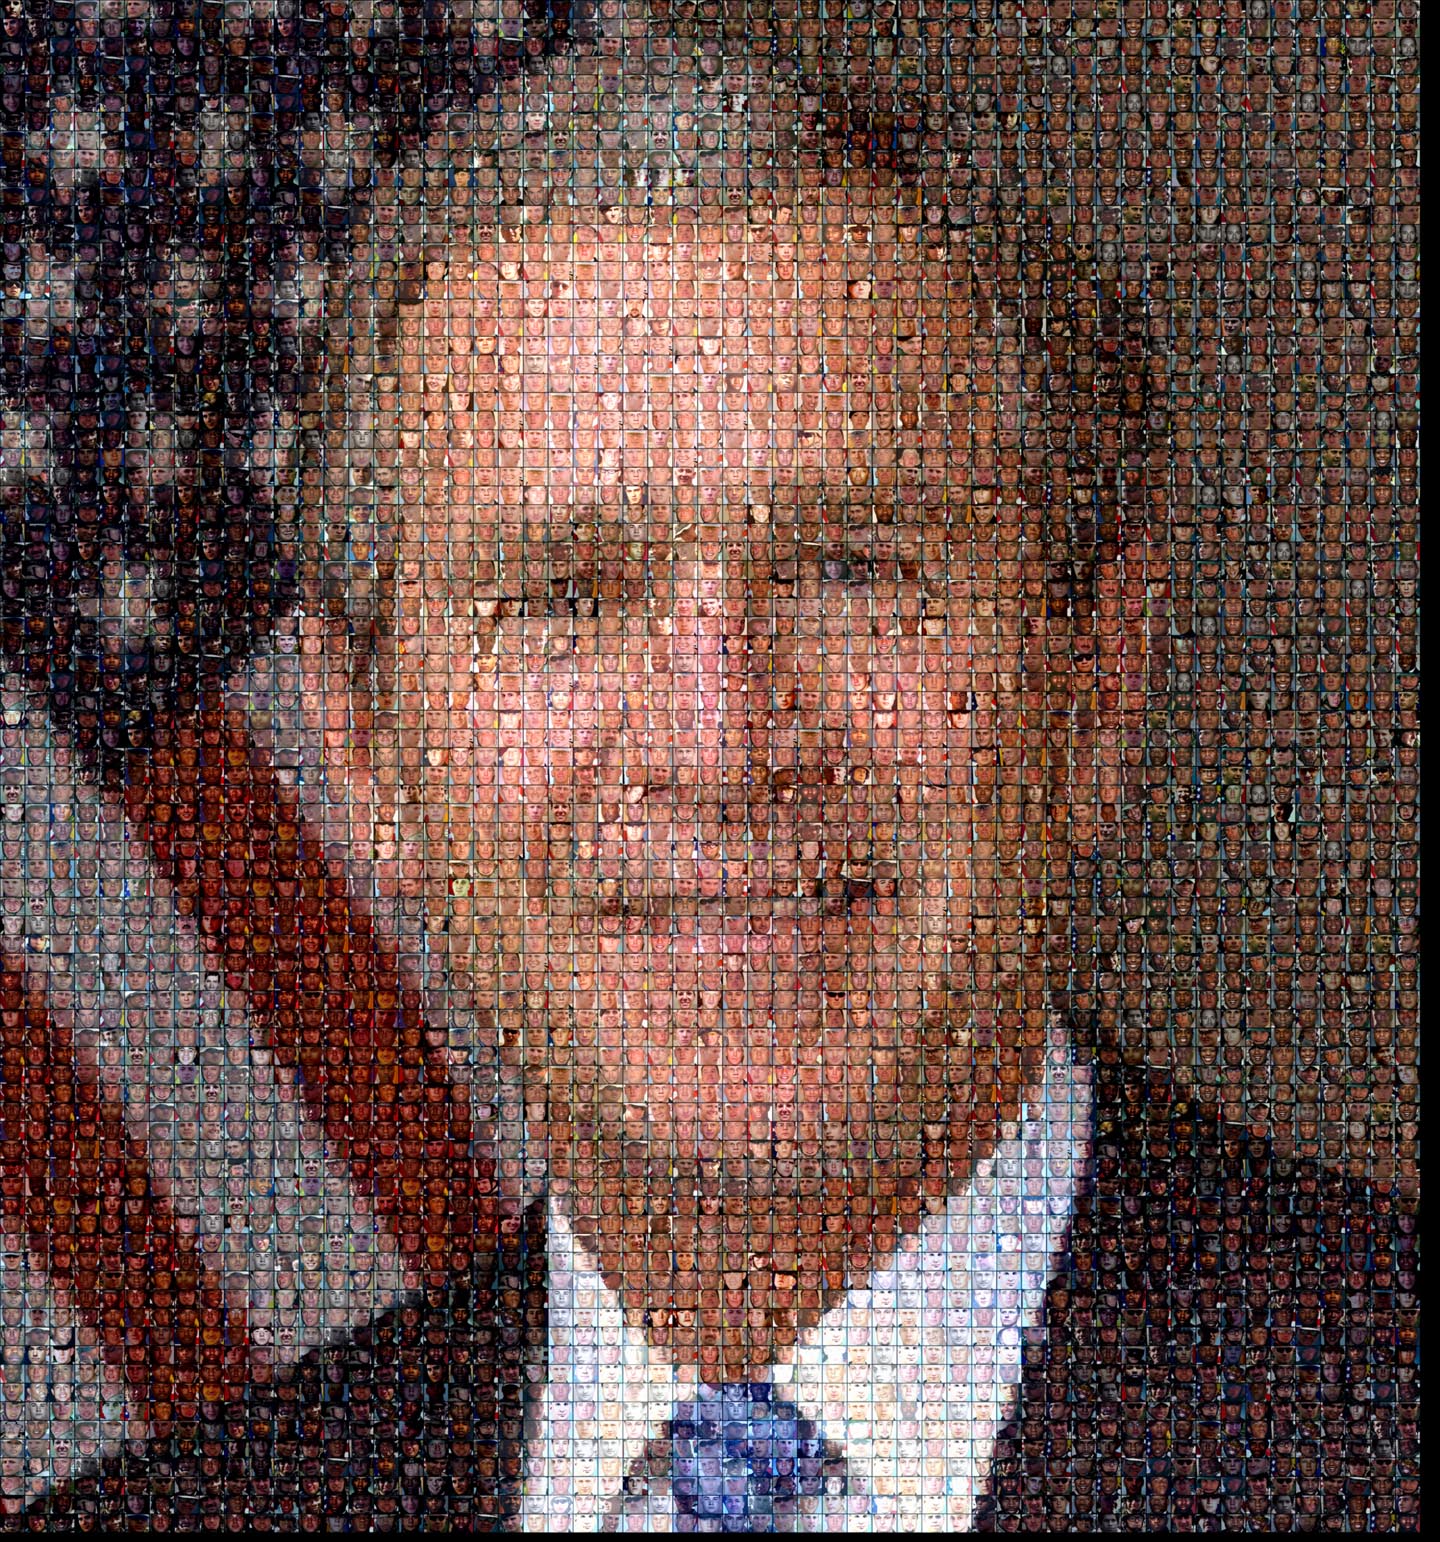 Enlarge to see the picture is made up of photos of the American casualties in the war. For every death in Iraq, George W. Bush is responsible. 